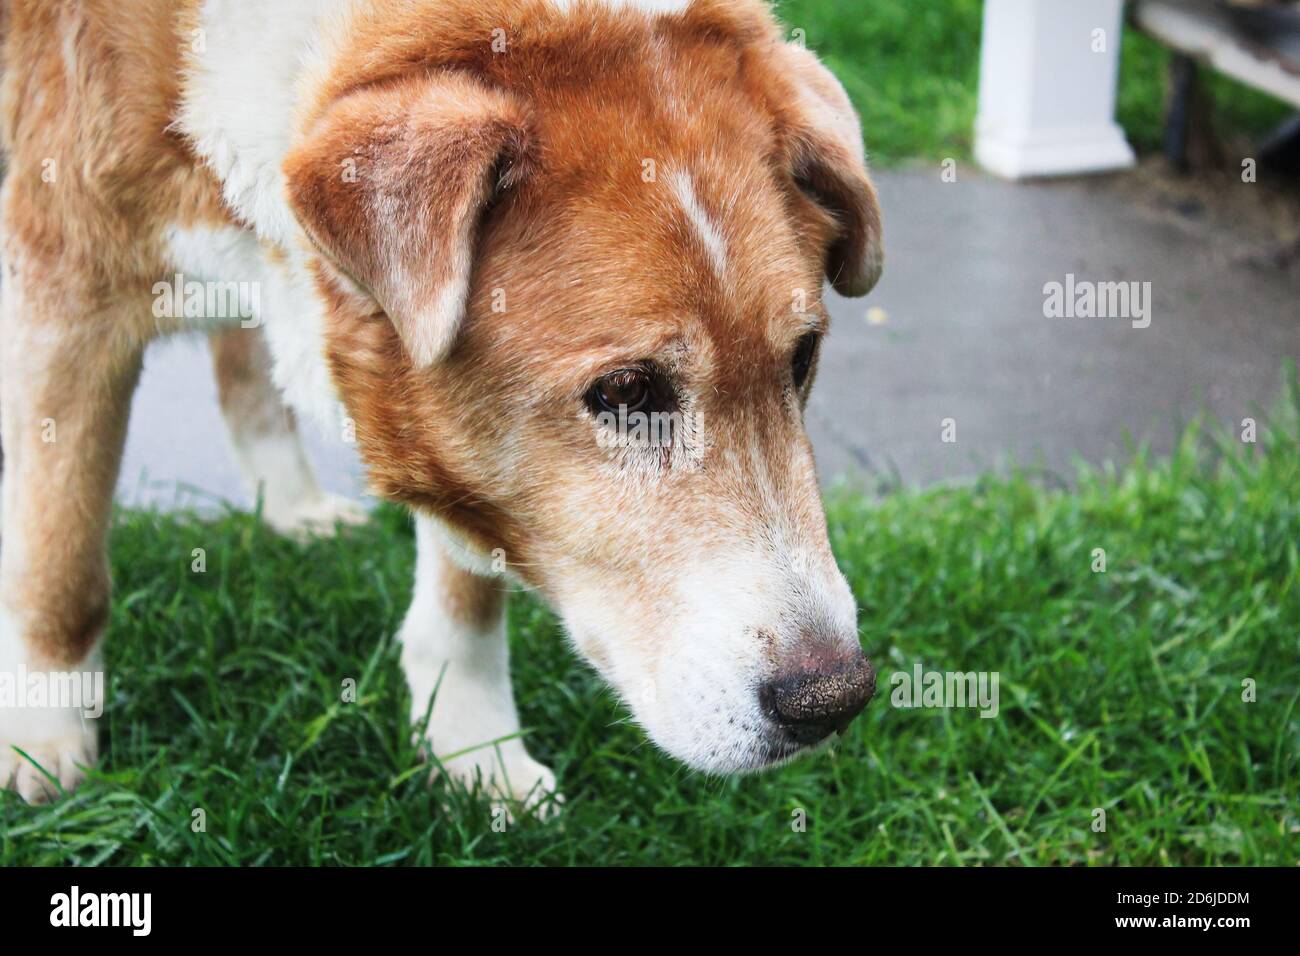 A sad looking farm dog with its' head lowered Stock Photo